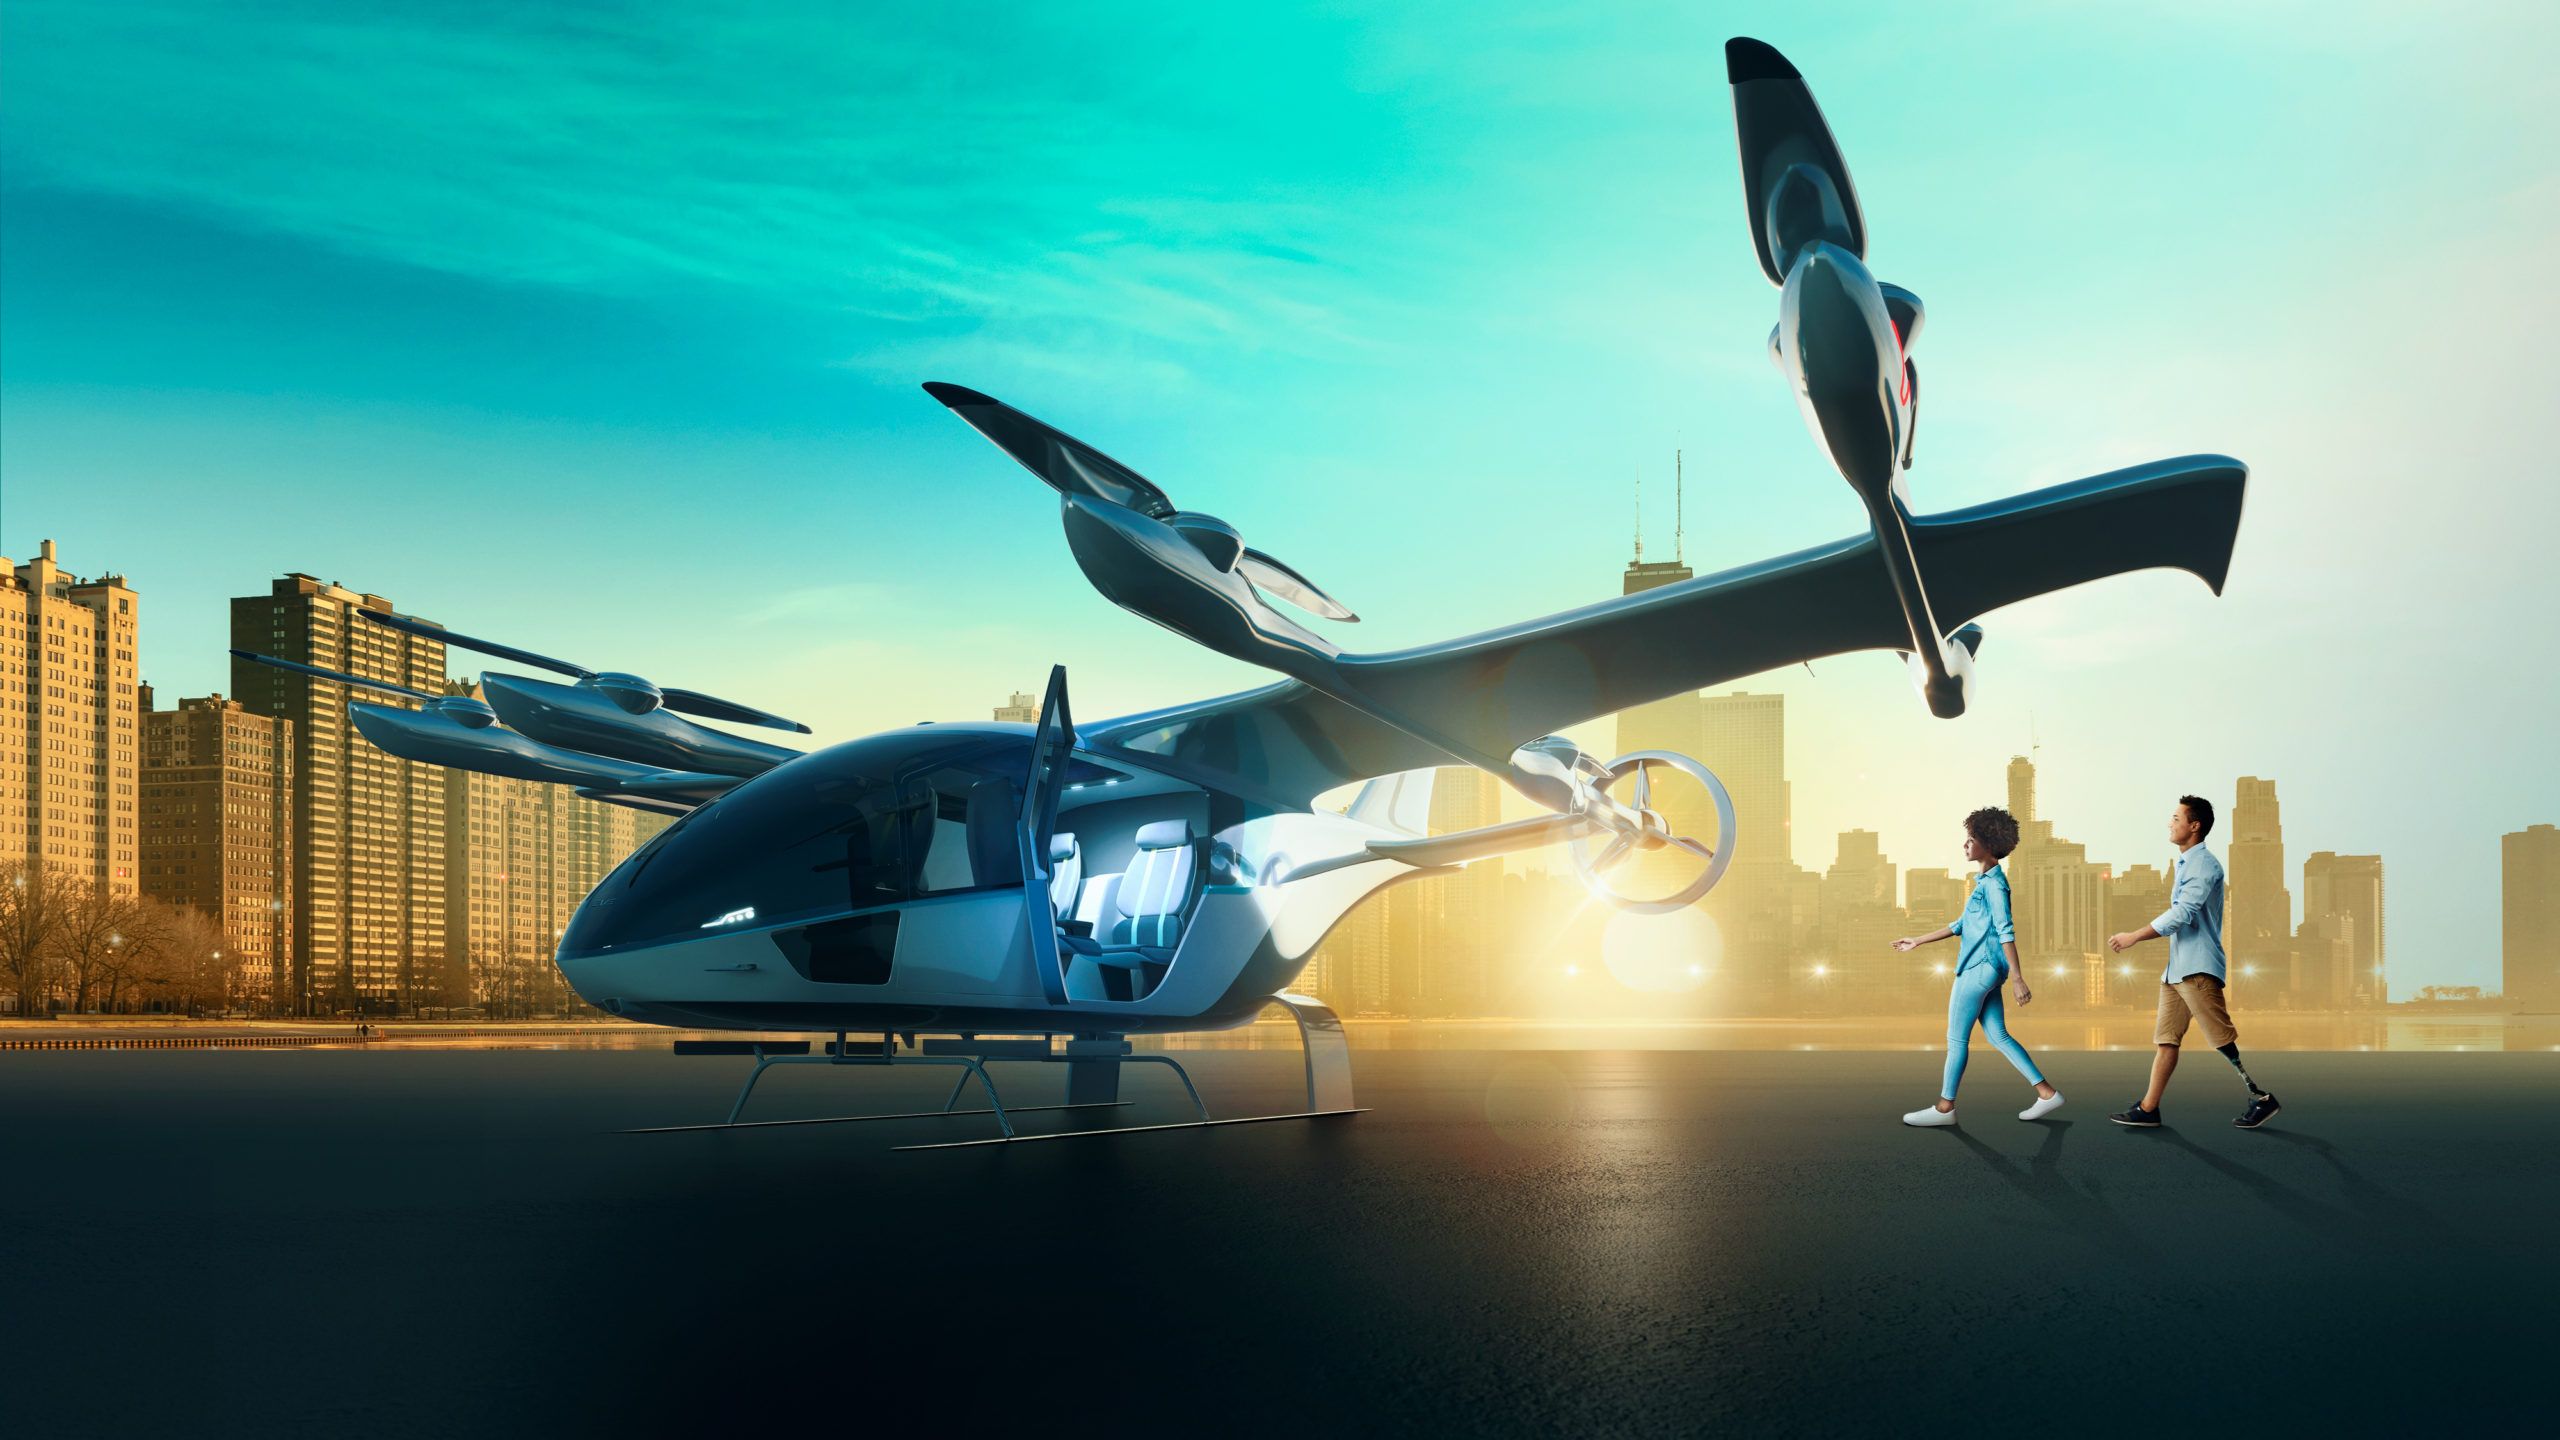 EVE's Urban Air Mobility service to debut in Chicago.